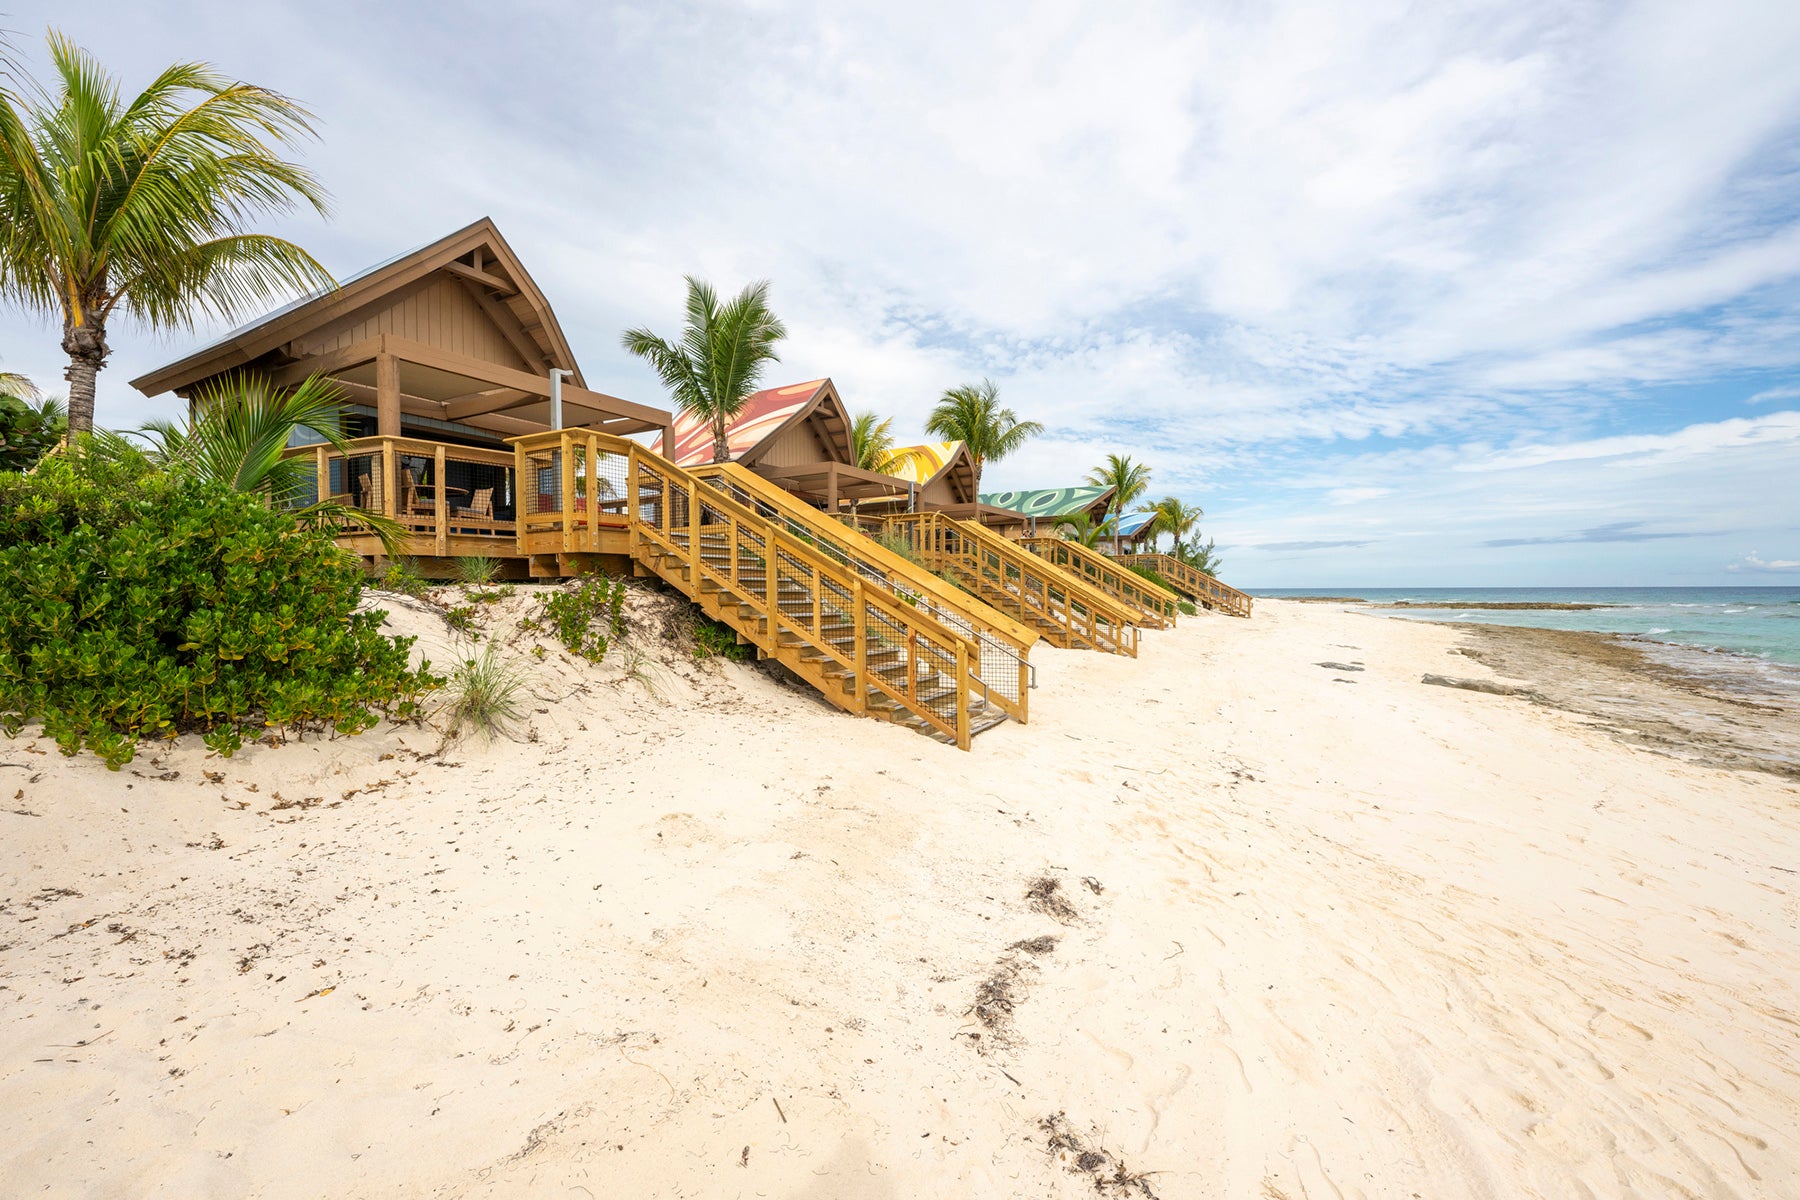 Check Out Lookout Cay, Disney’s New Island Destination In Eleuthera